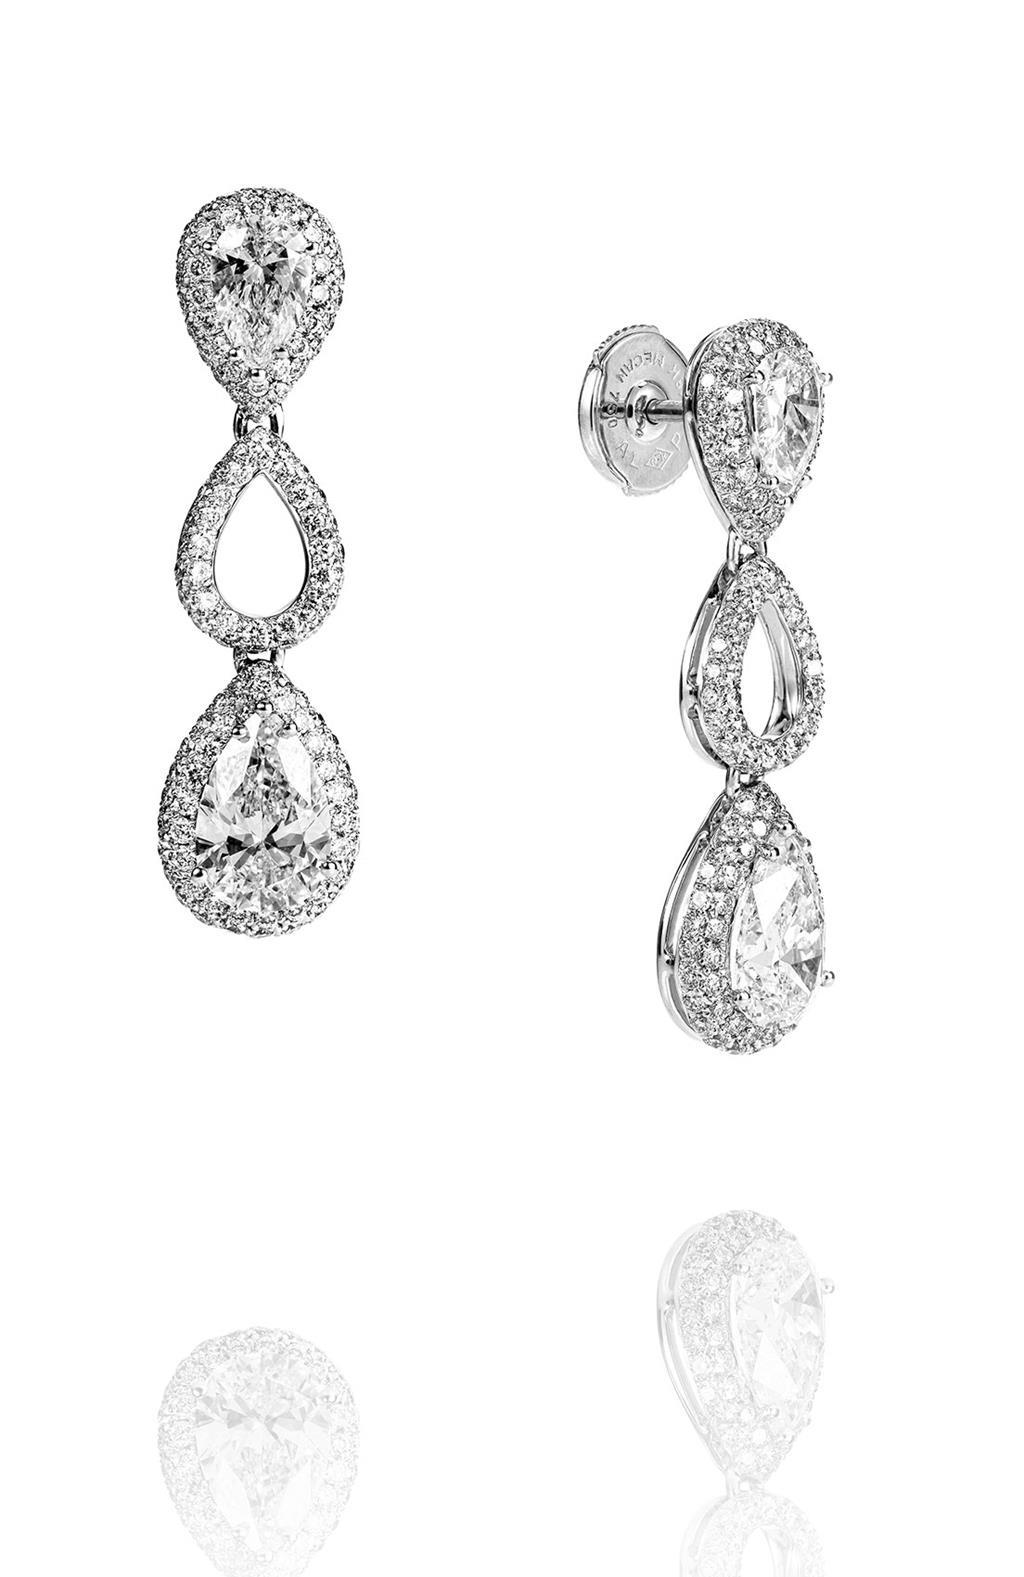 Earrings "L'Hiver" - White gold set with 4 pear-shaped diamonds and 255 diamonds